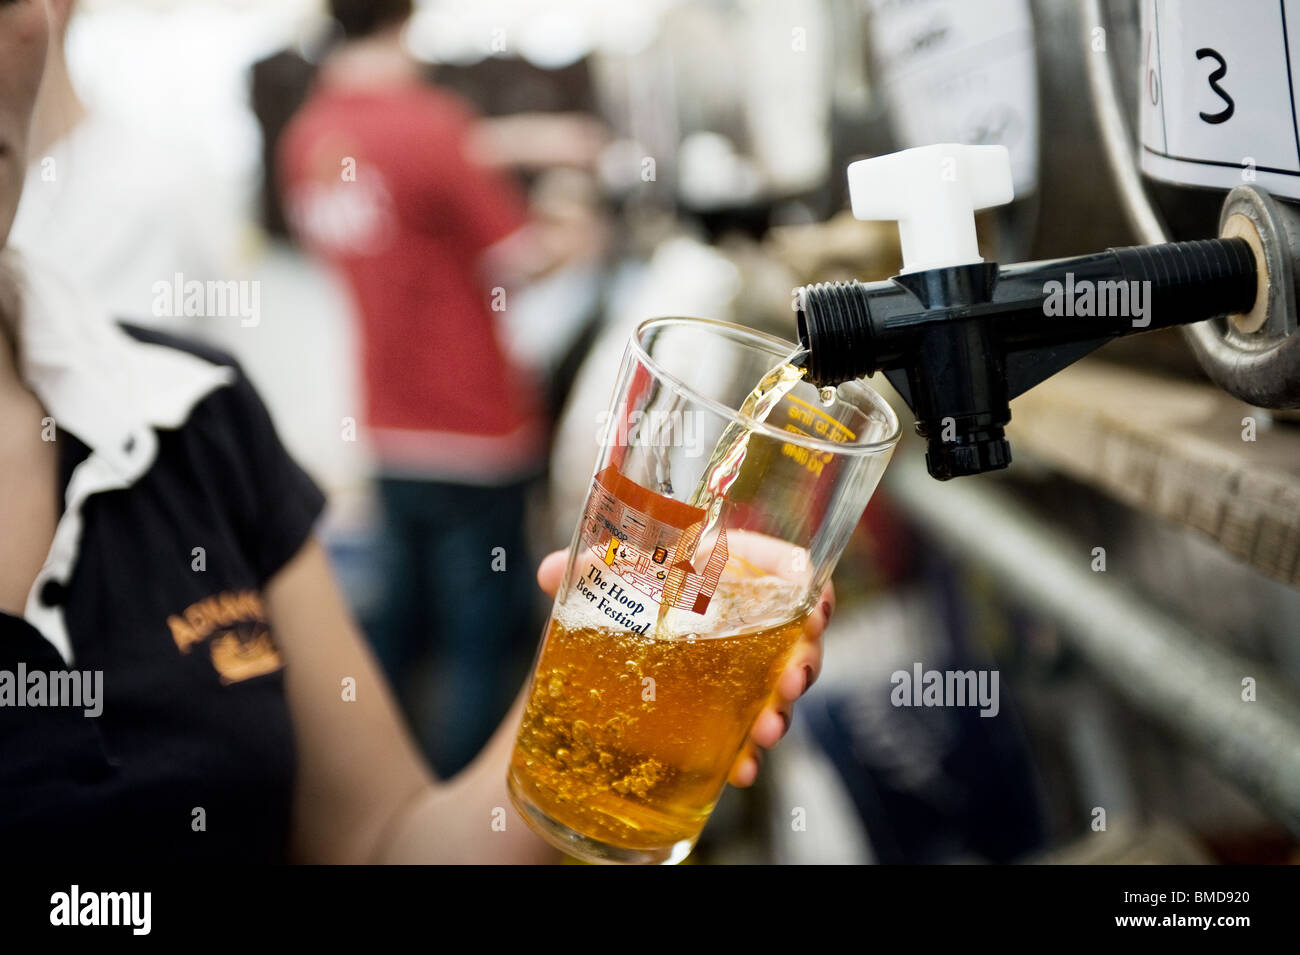 A pint of real ale being poured at the Hoop Pub Beer Festival in Stock in Essex. Stock Photo